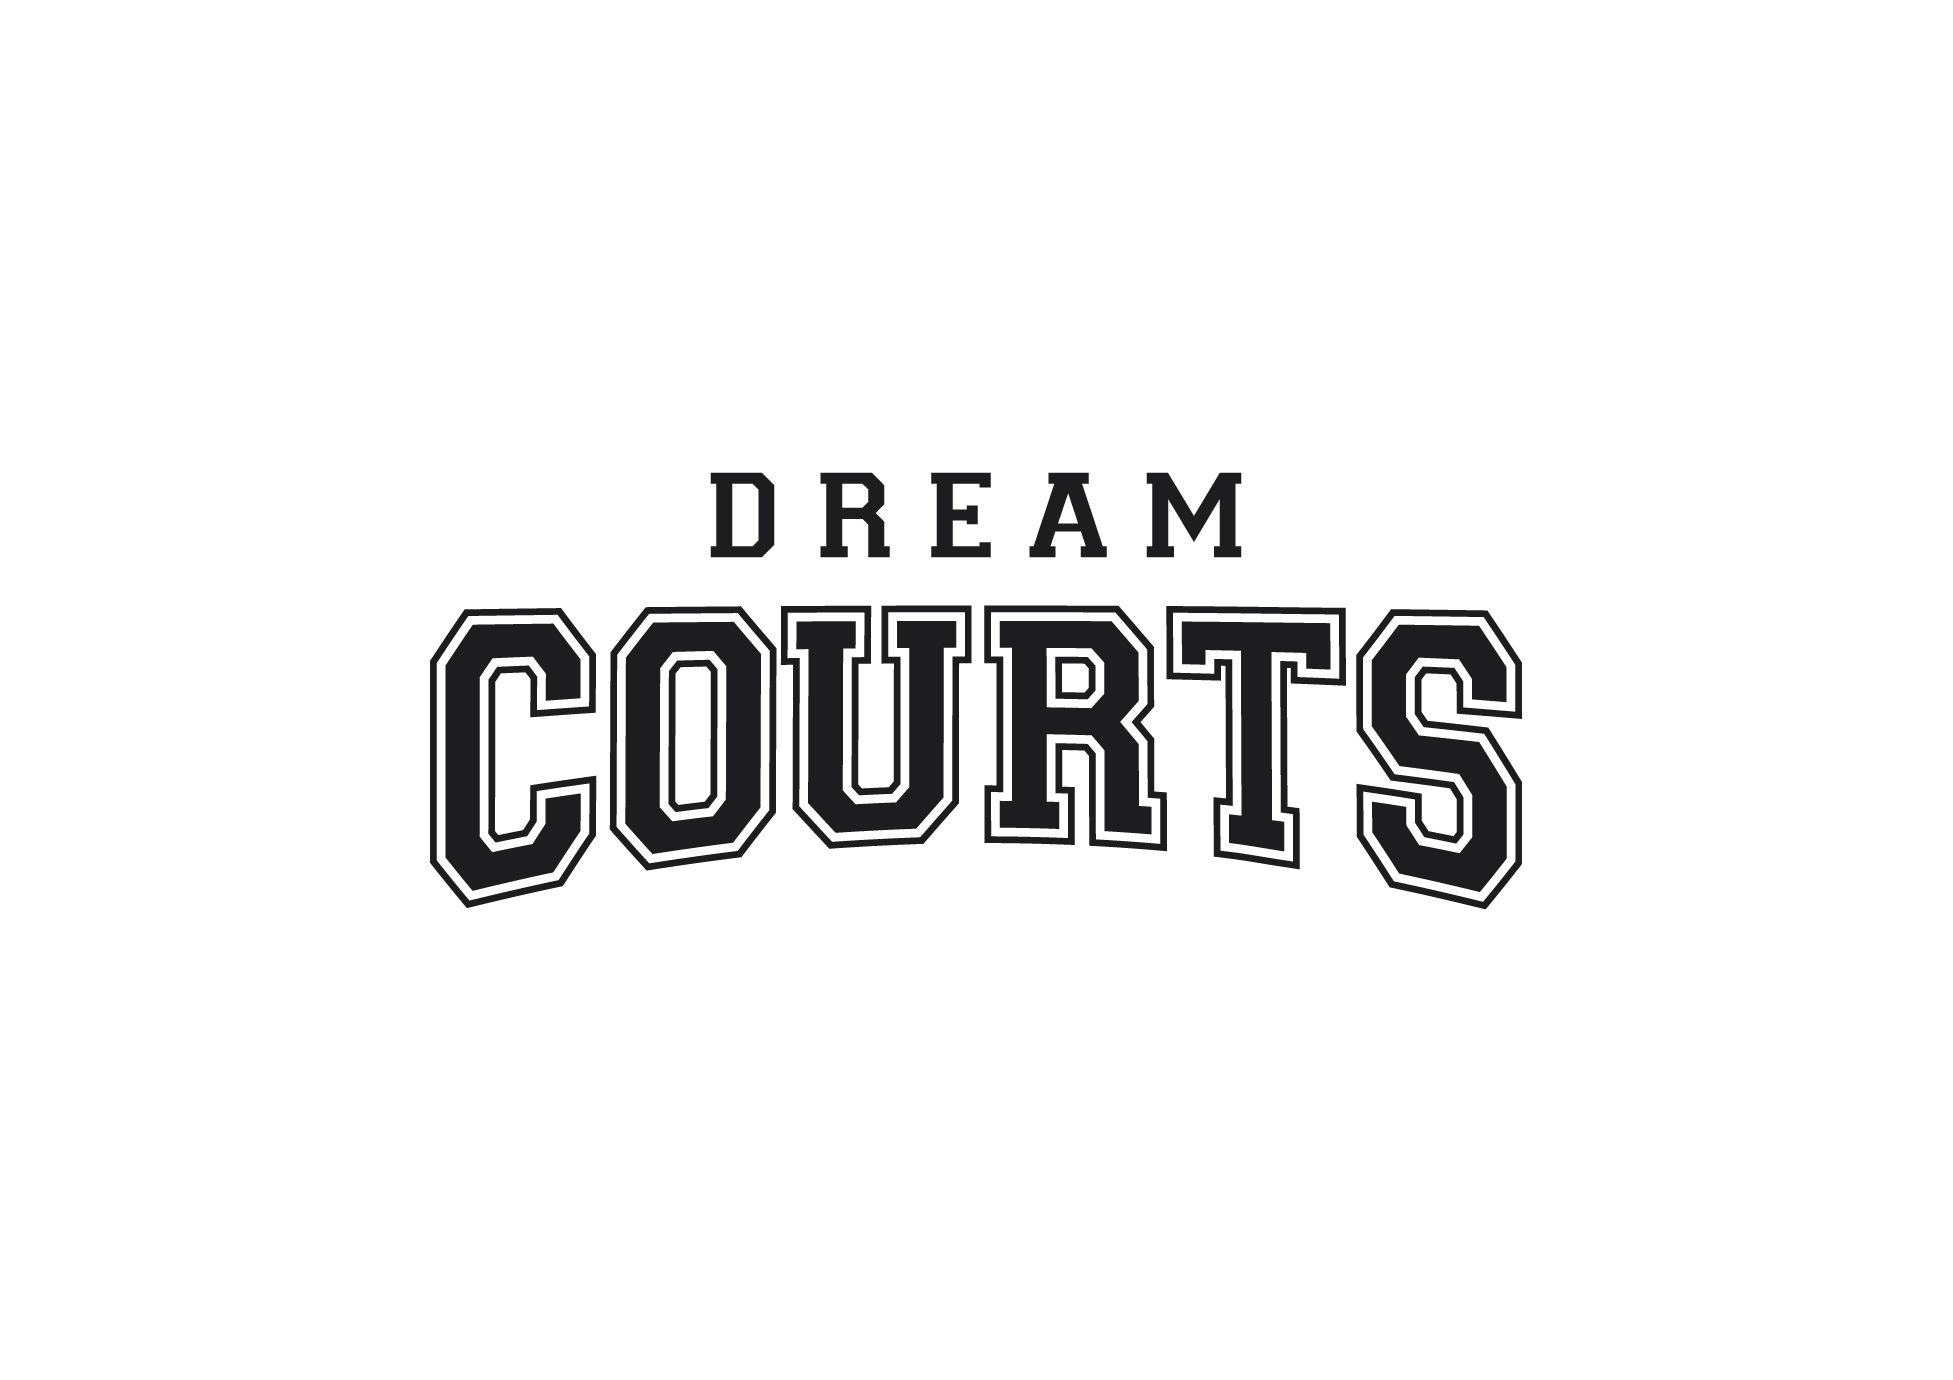 Kethy Australia, baresop, DreamCourts As Seen In The Block